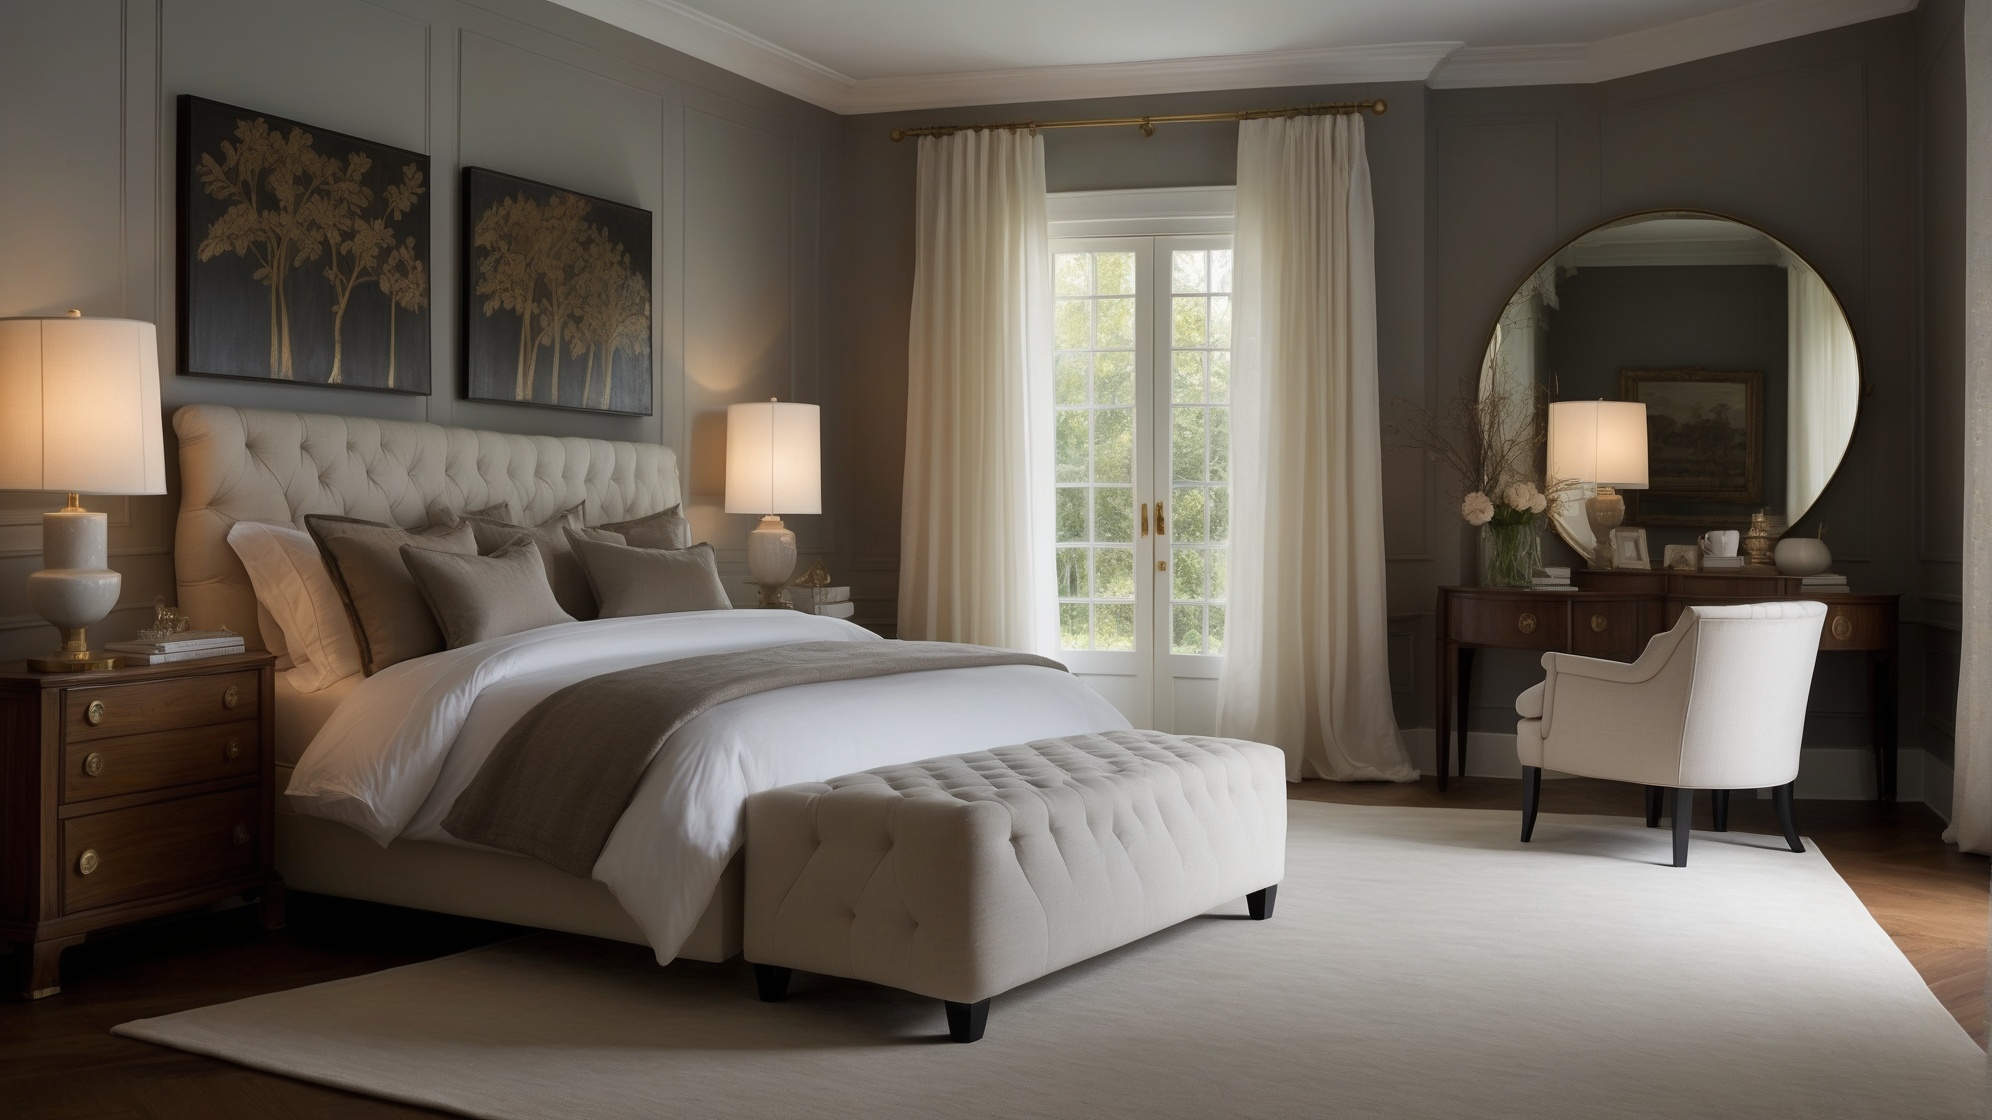 You are currently viewing Refresh Your Home Bedroom with Our Inspiring Designs